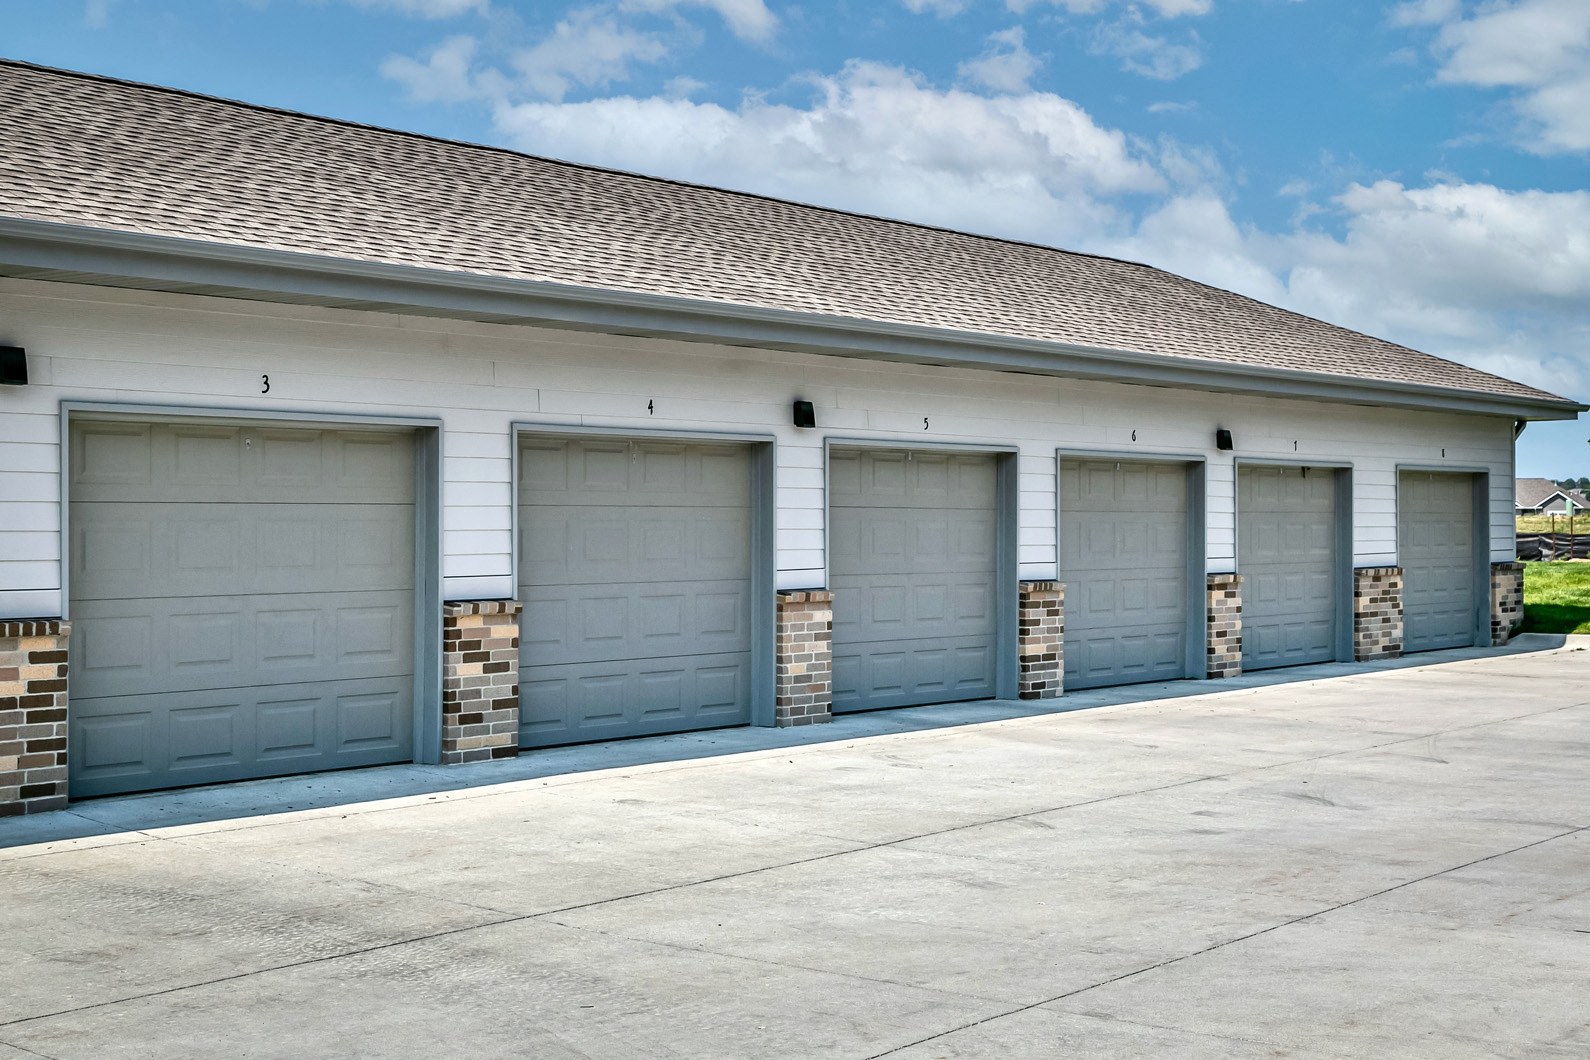 Detached garages at AXIS apartments in Papillion, NE